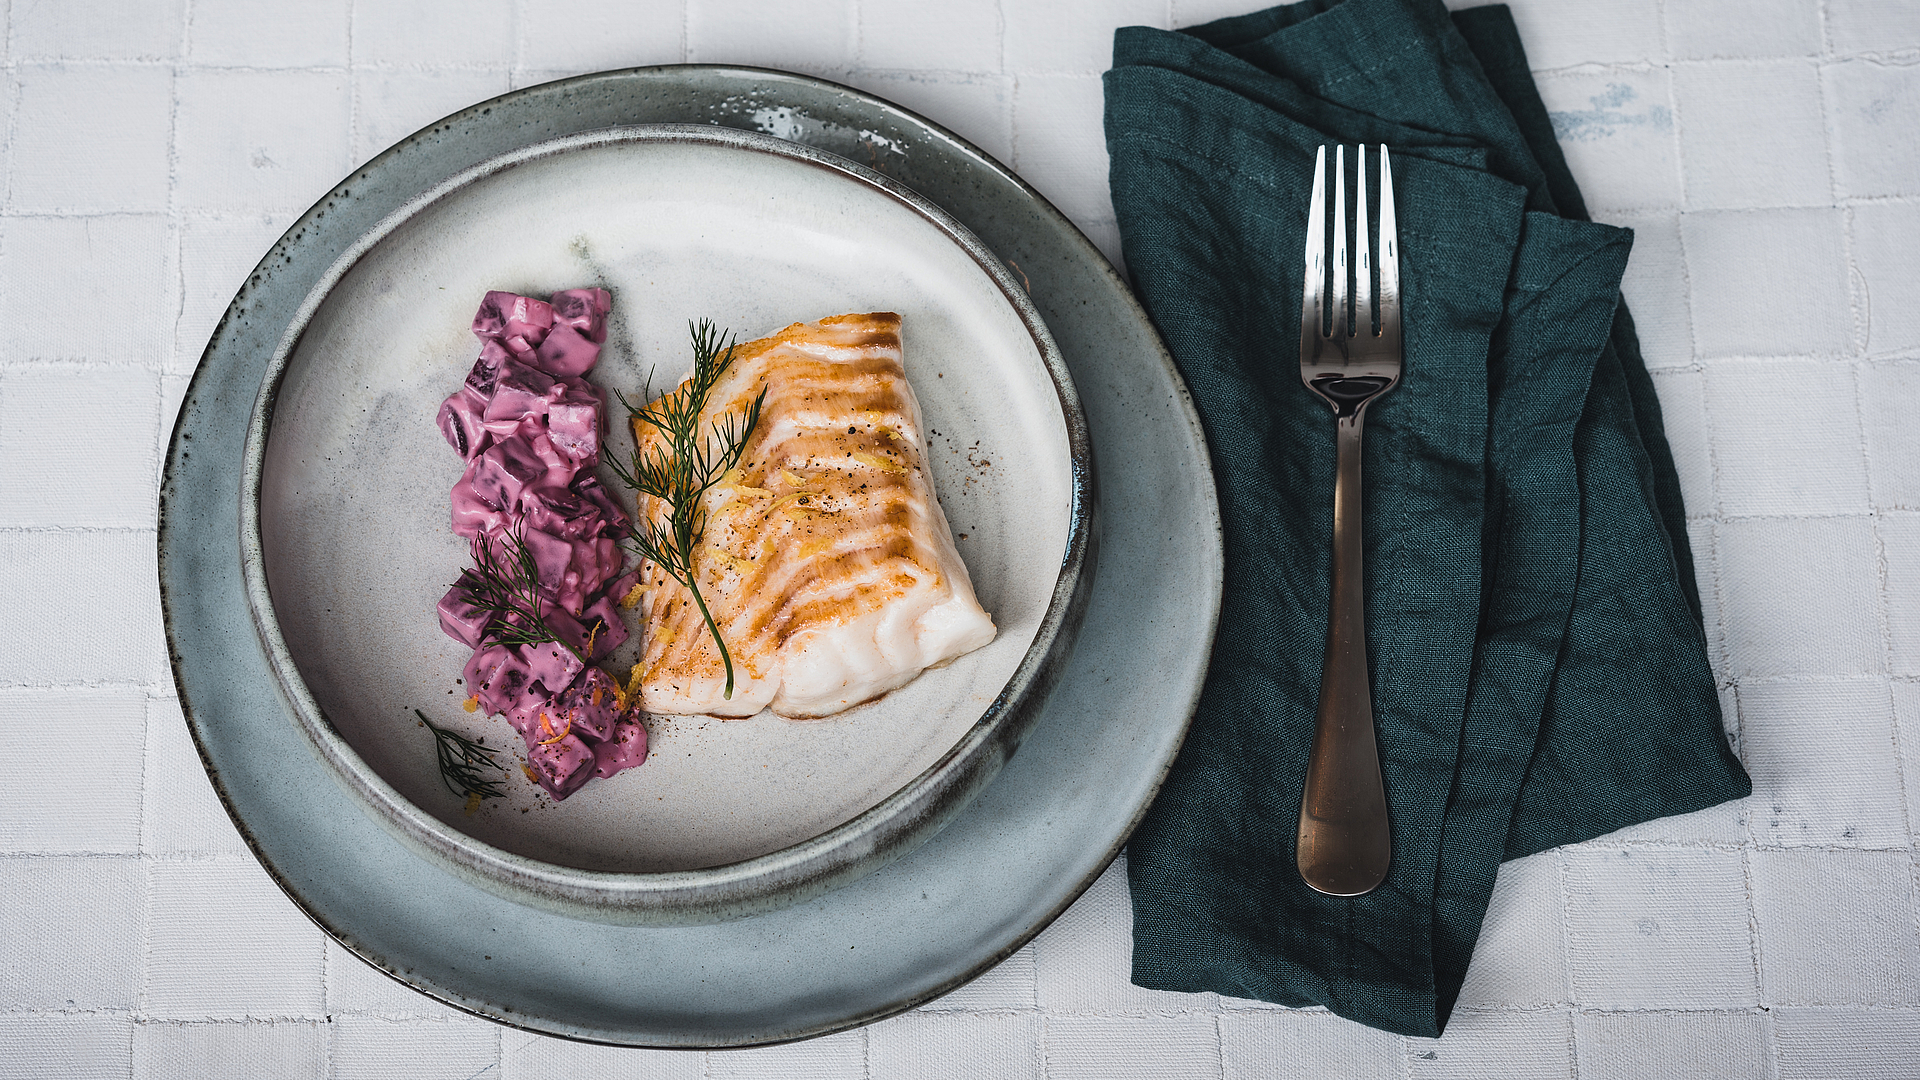 Pan-seared cod on a bed of beetroot and Skyr